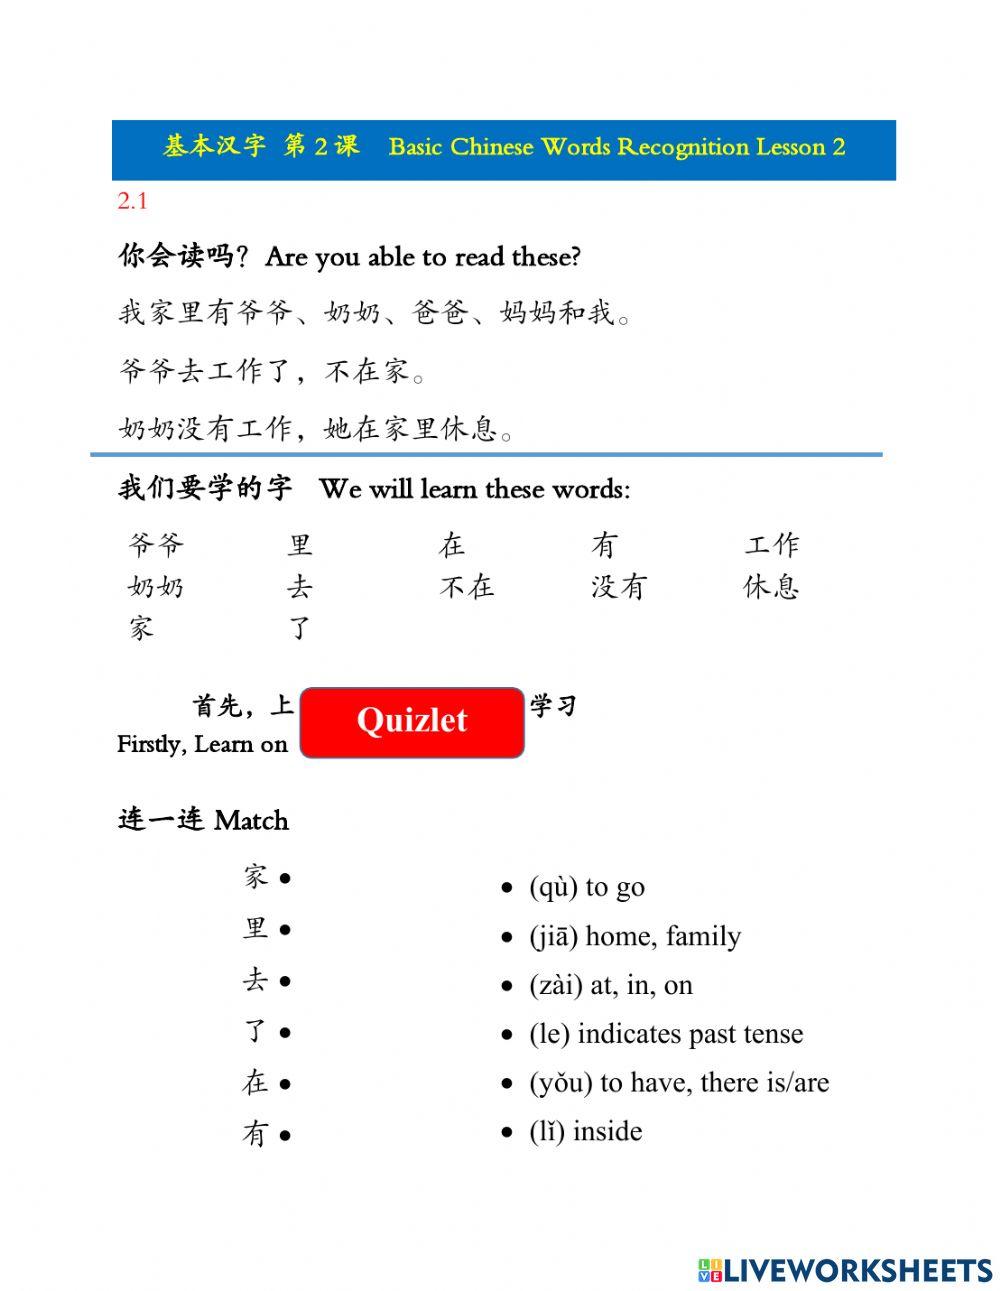 Basic Chinese Words Recognition 2.1